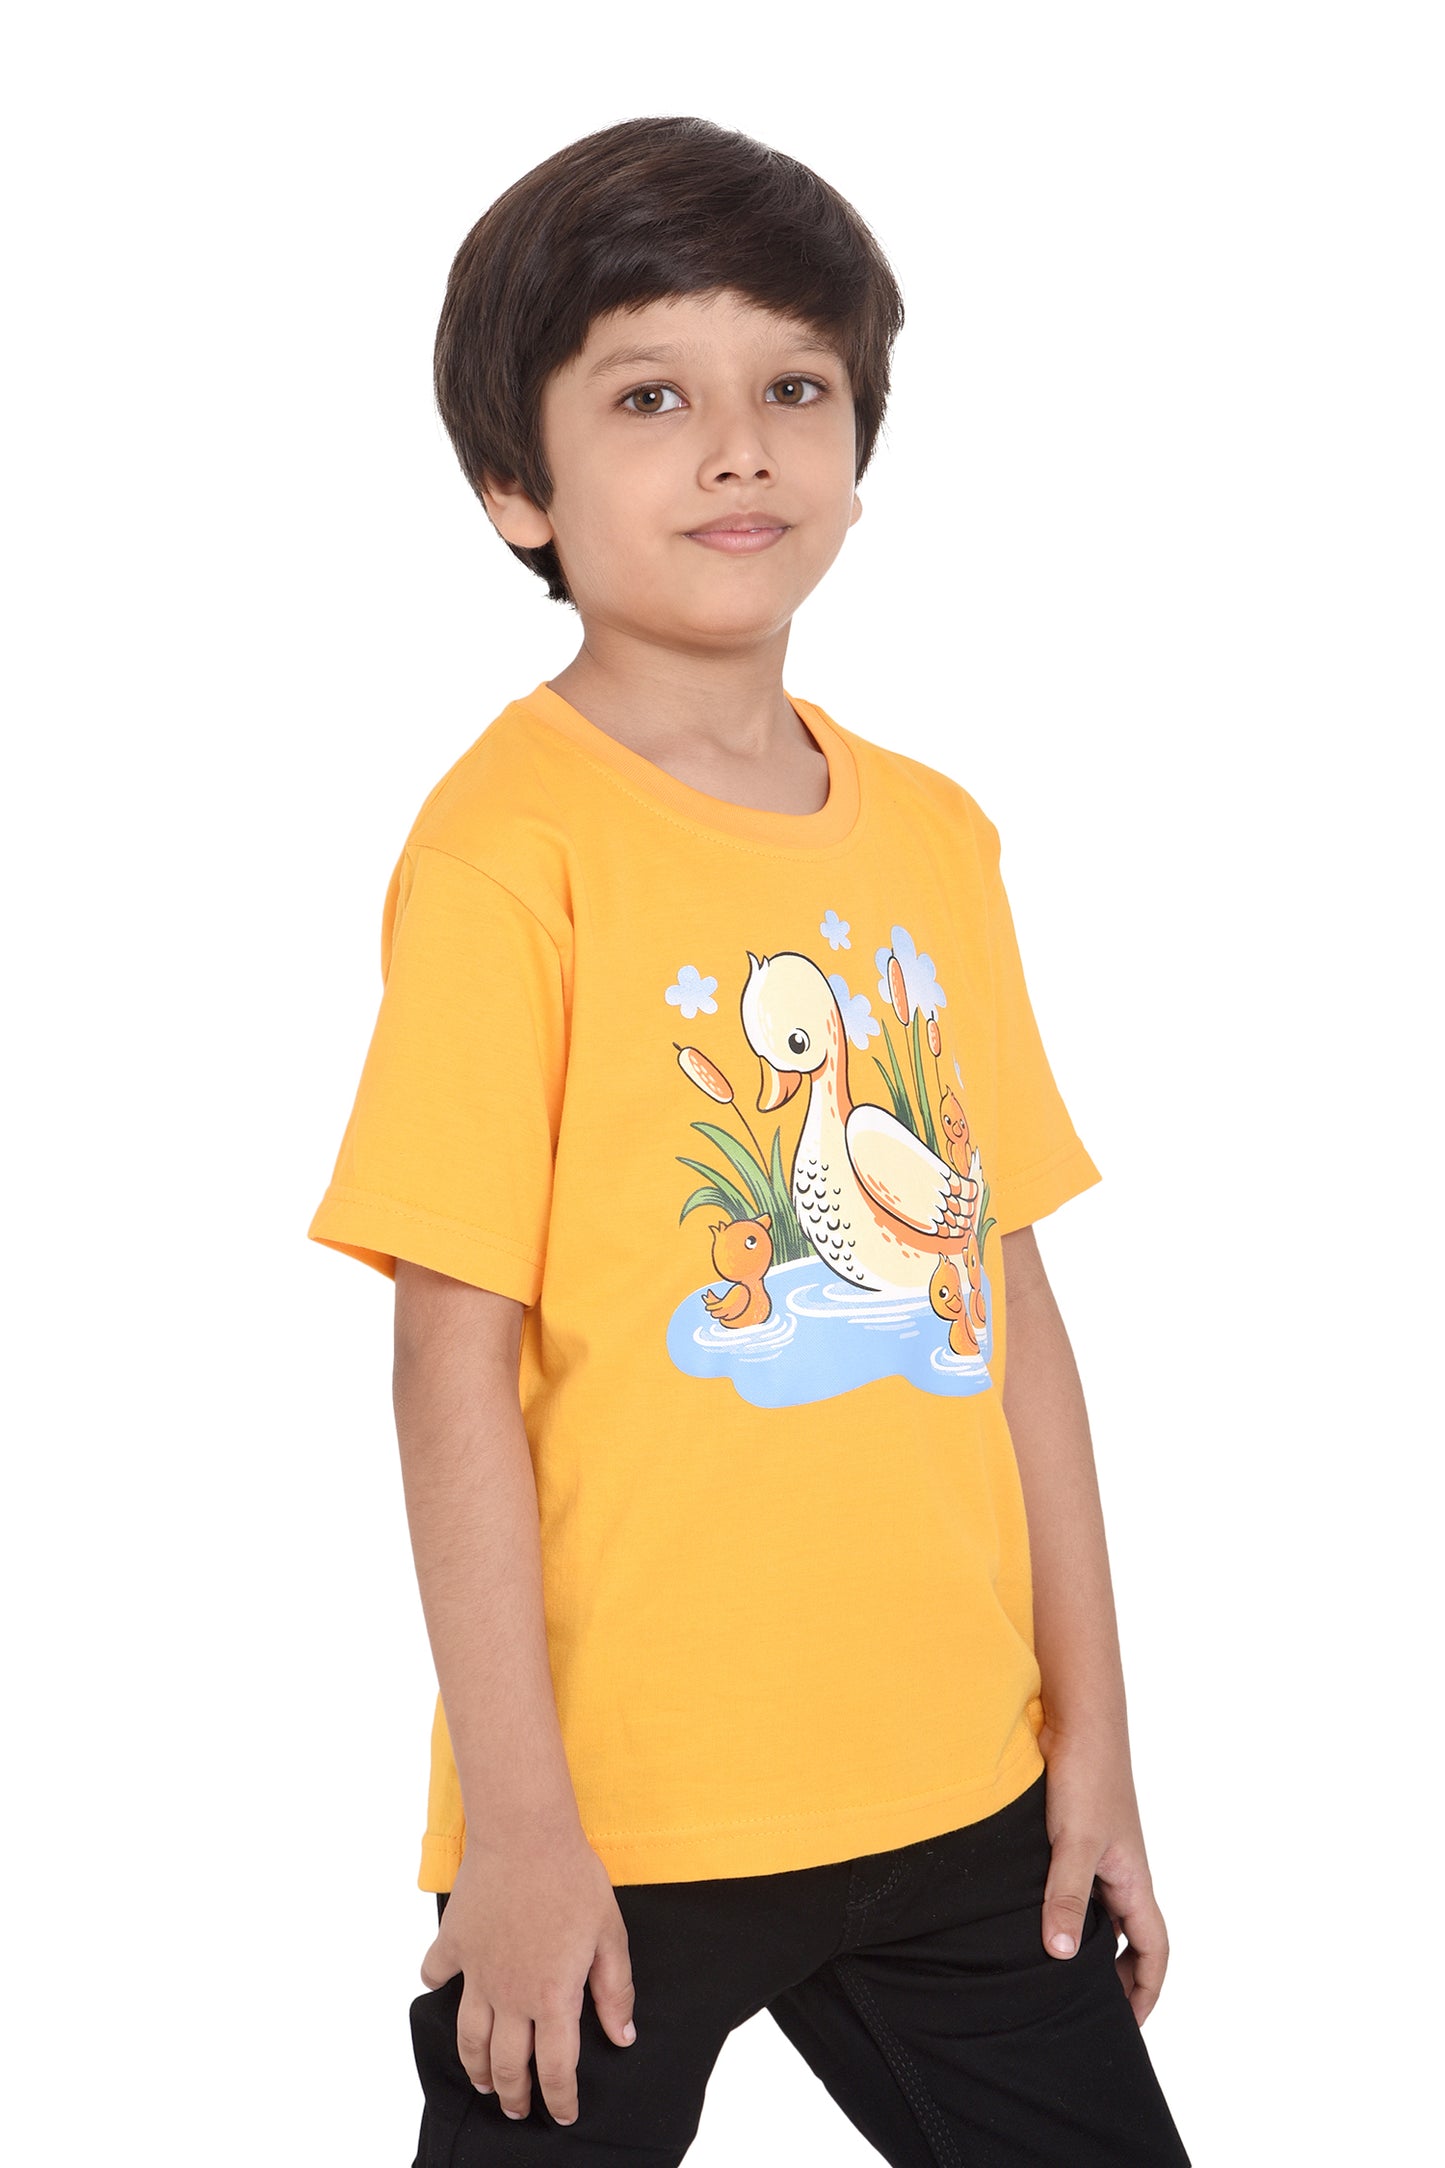 NEO GARMENTS Kid's Boys & Girls Round Neck Cotton T-shirt | DUCK. | SIZE FROM 1YRS TO 7YRS.